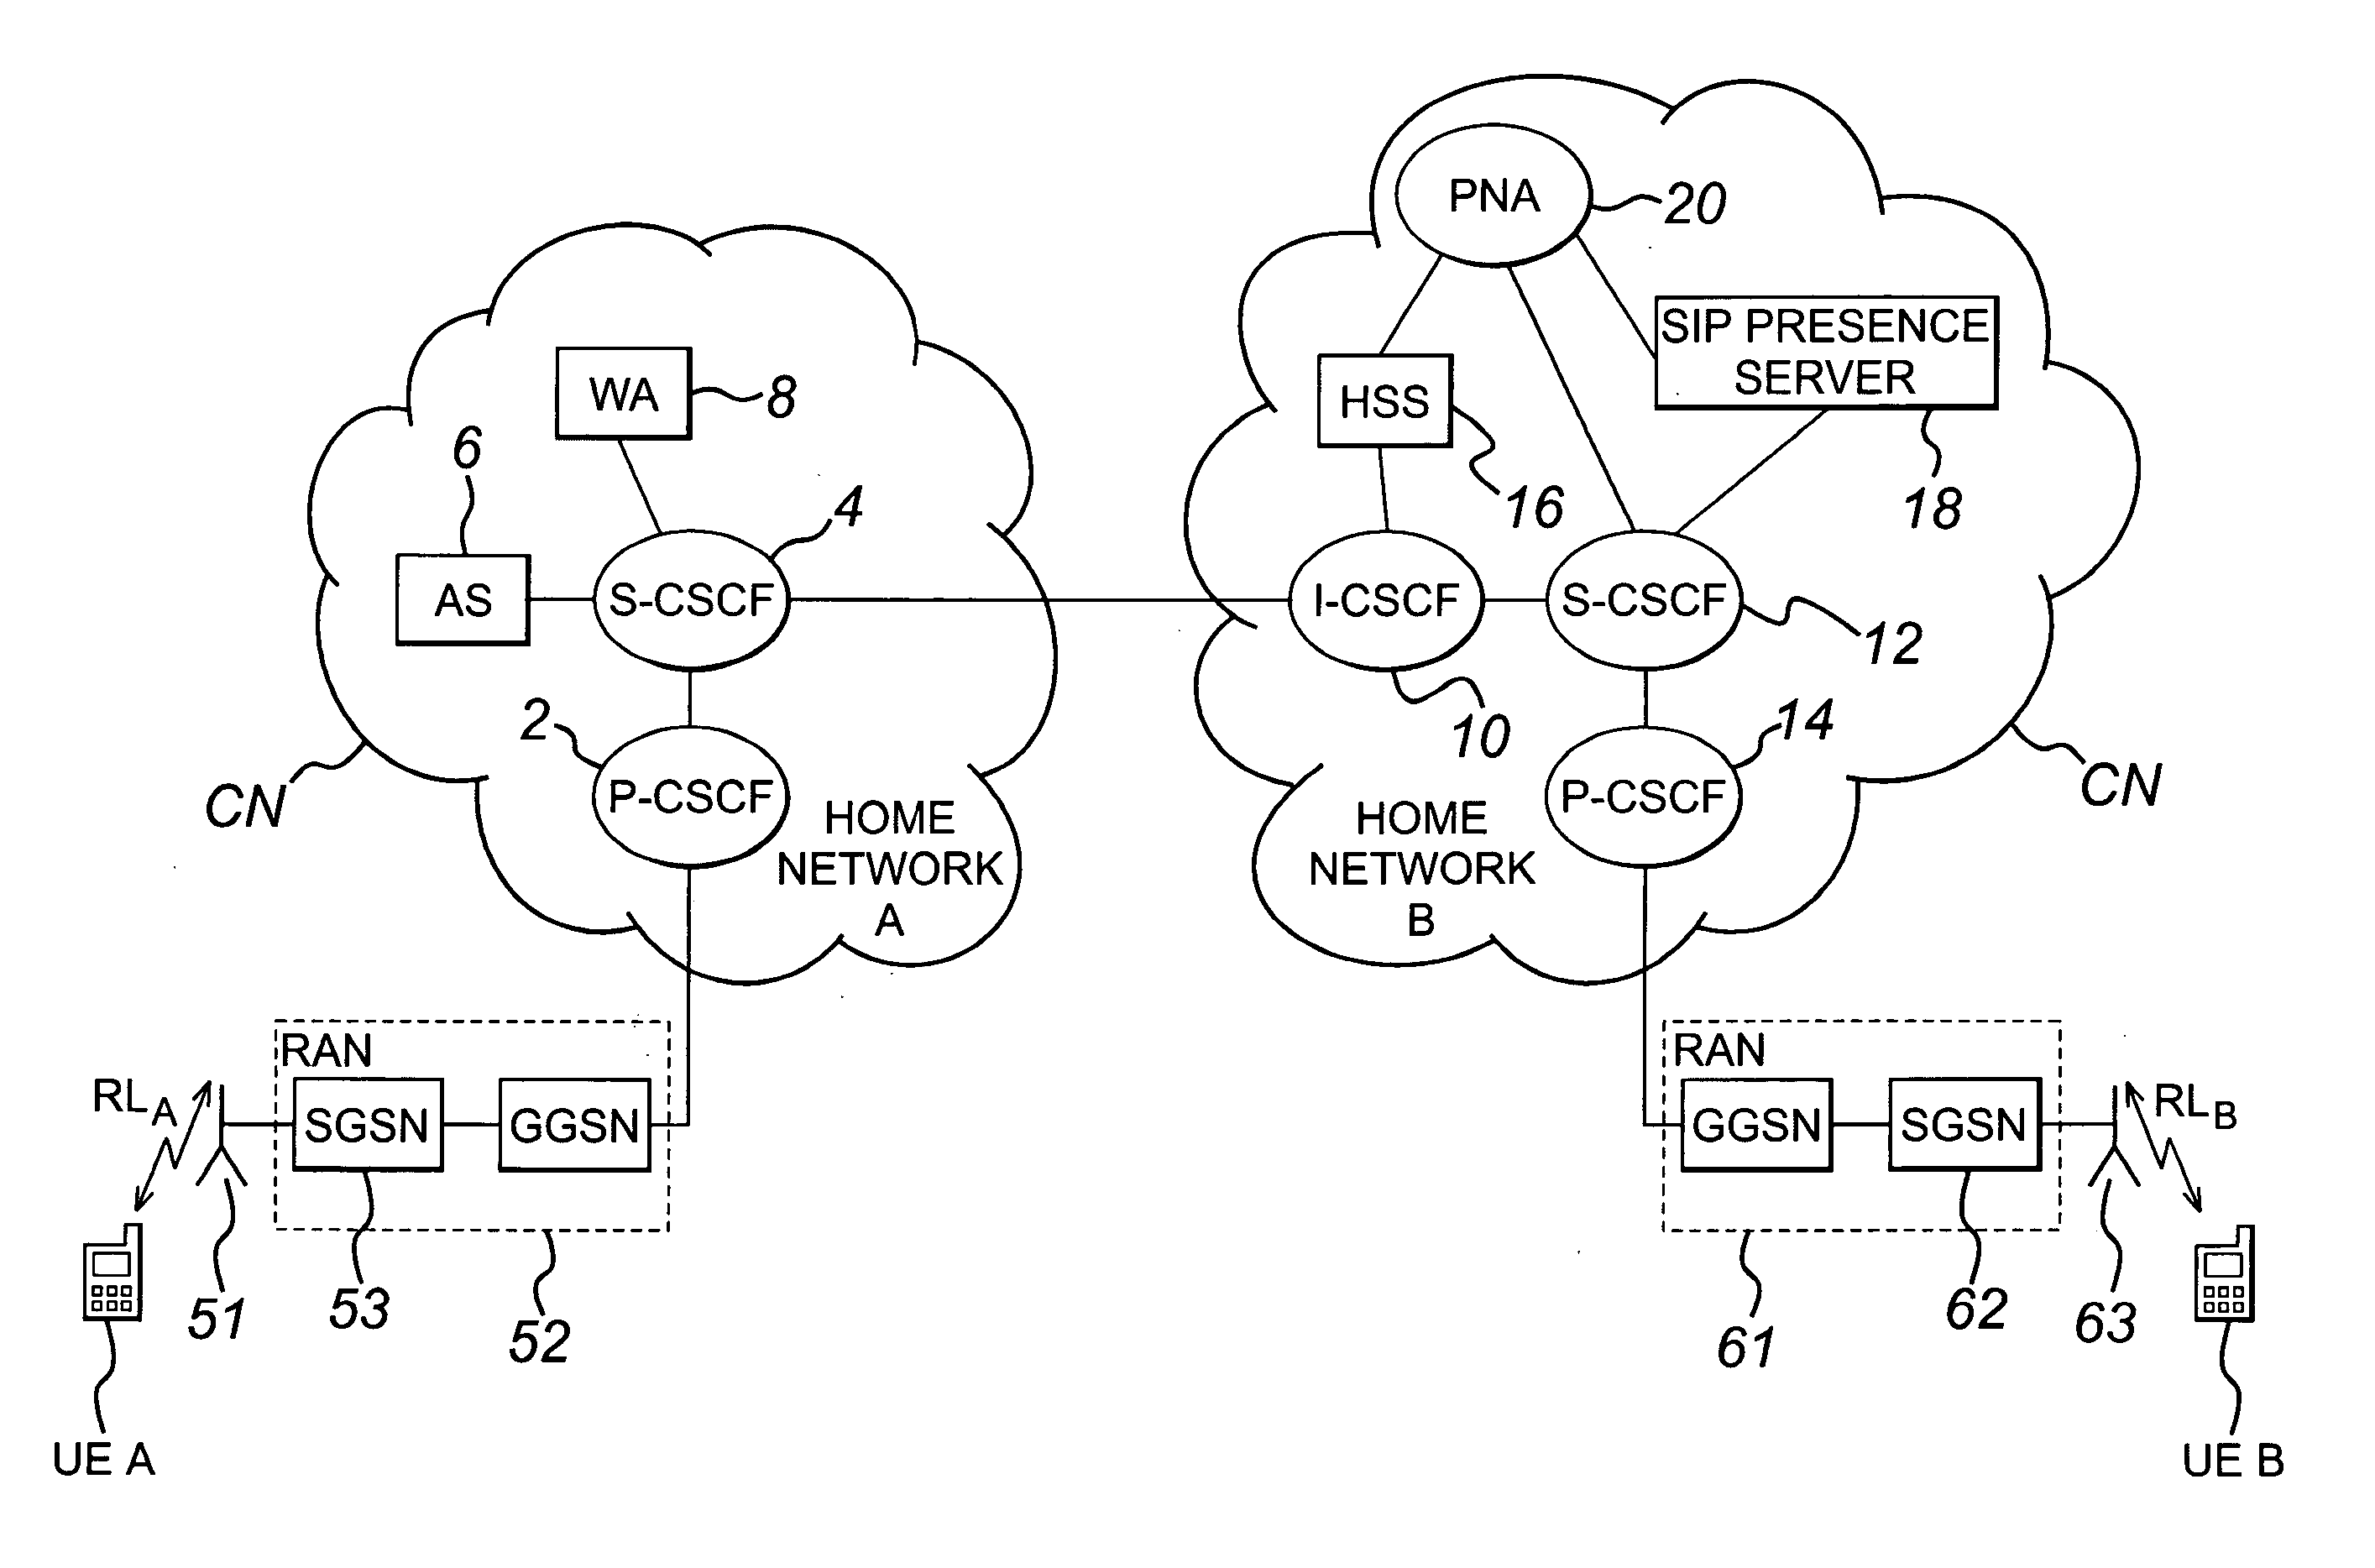 Presence services in a wireless communications network